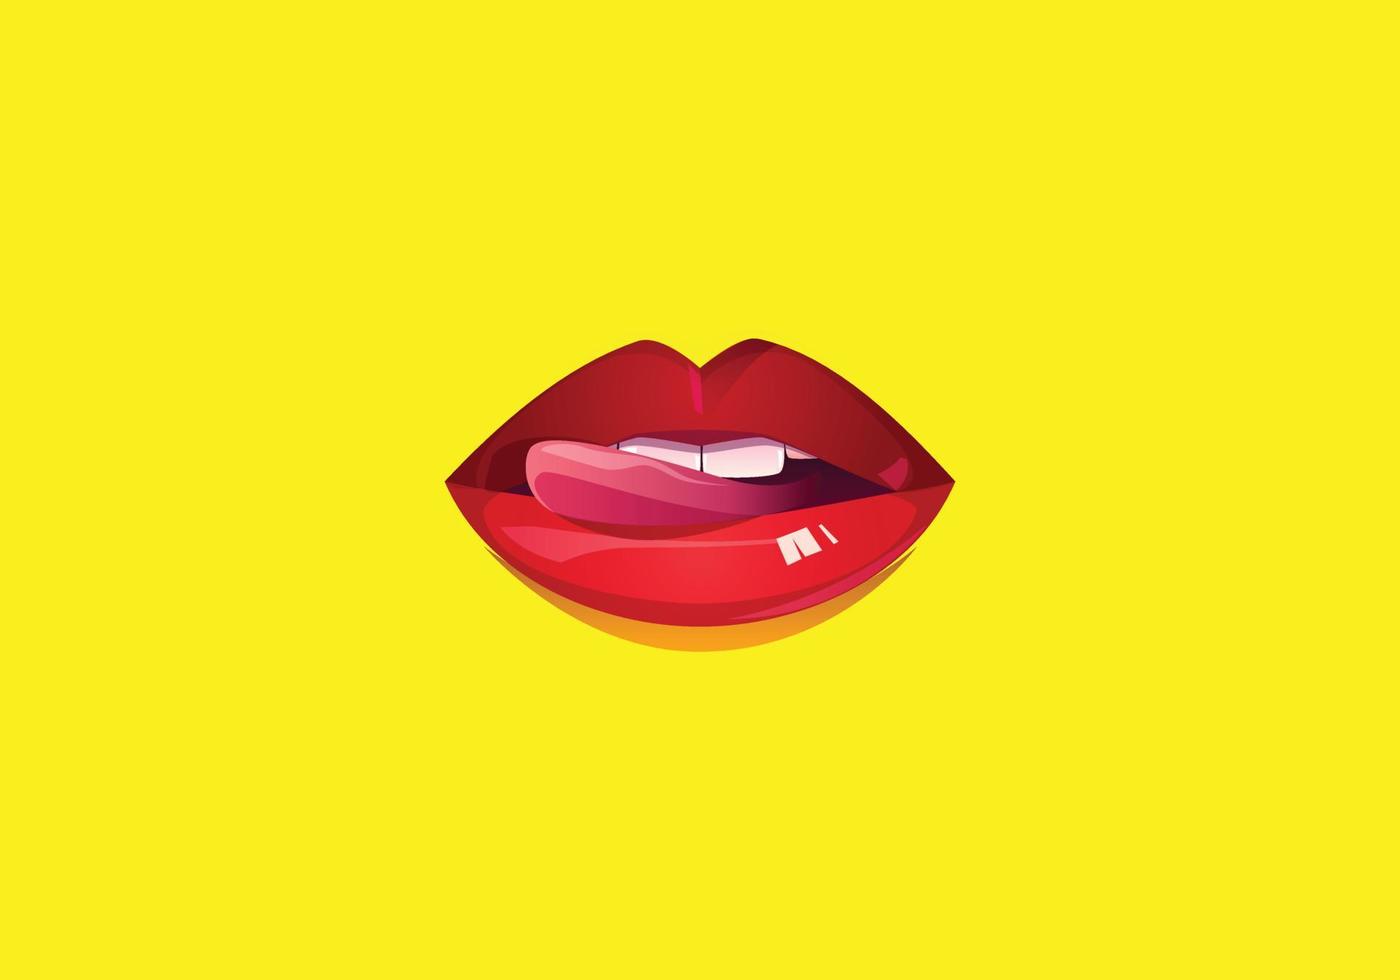 this is a red lips design vector